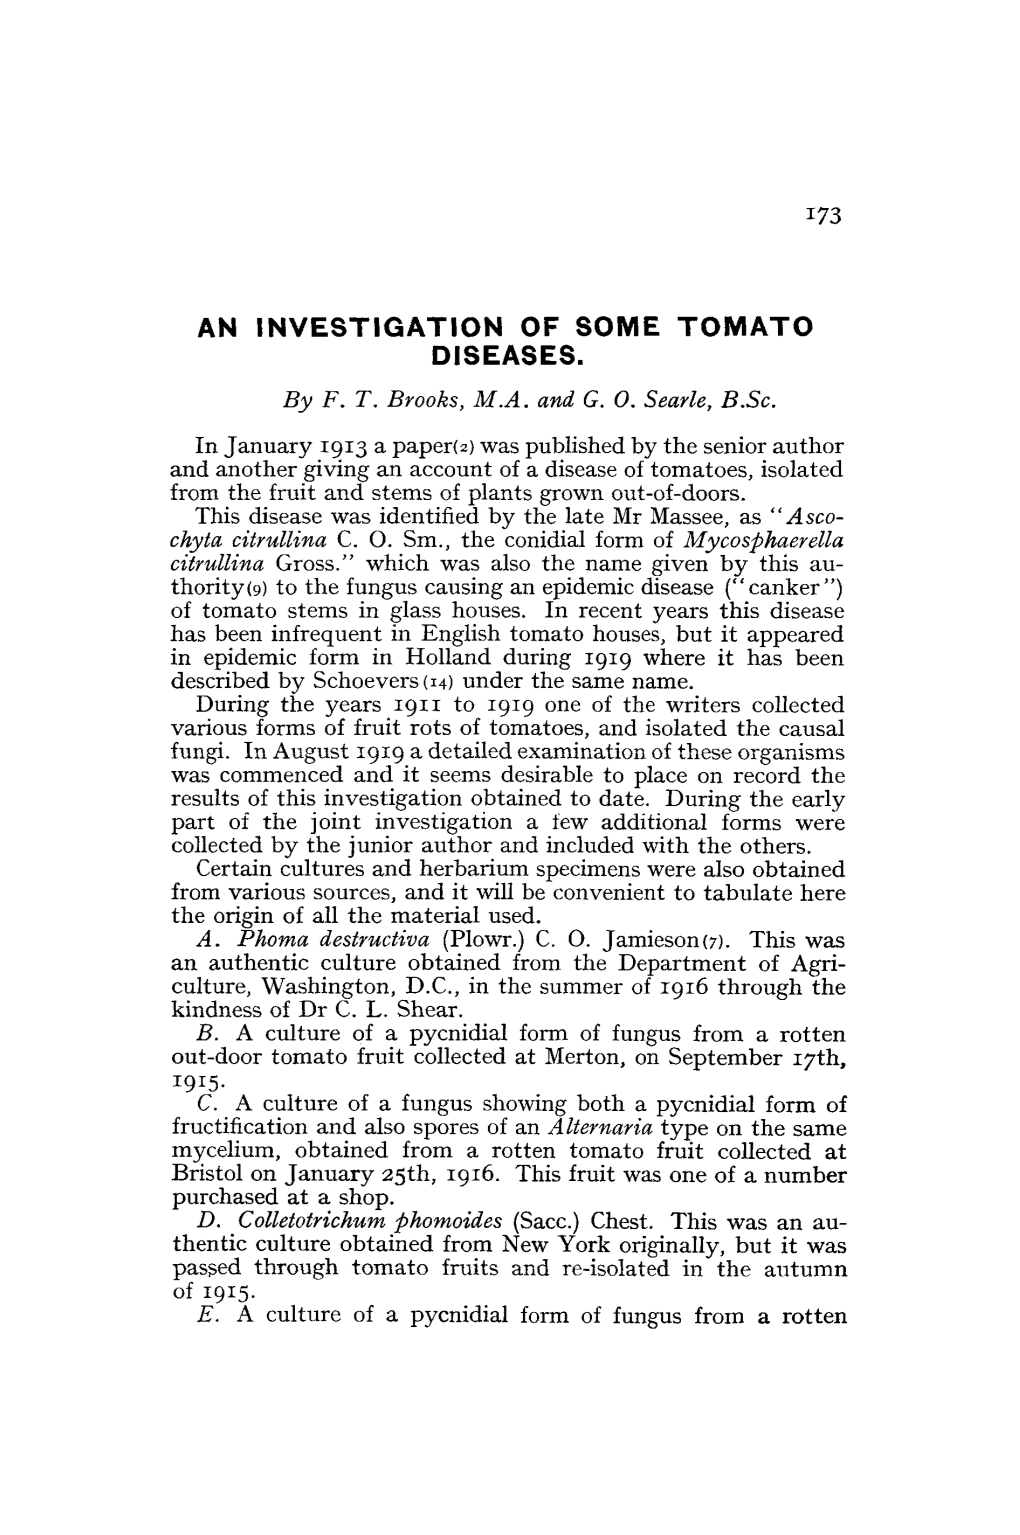 An Investigation of Some Tomato Diseases